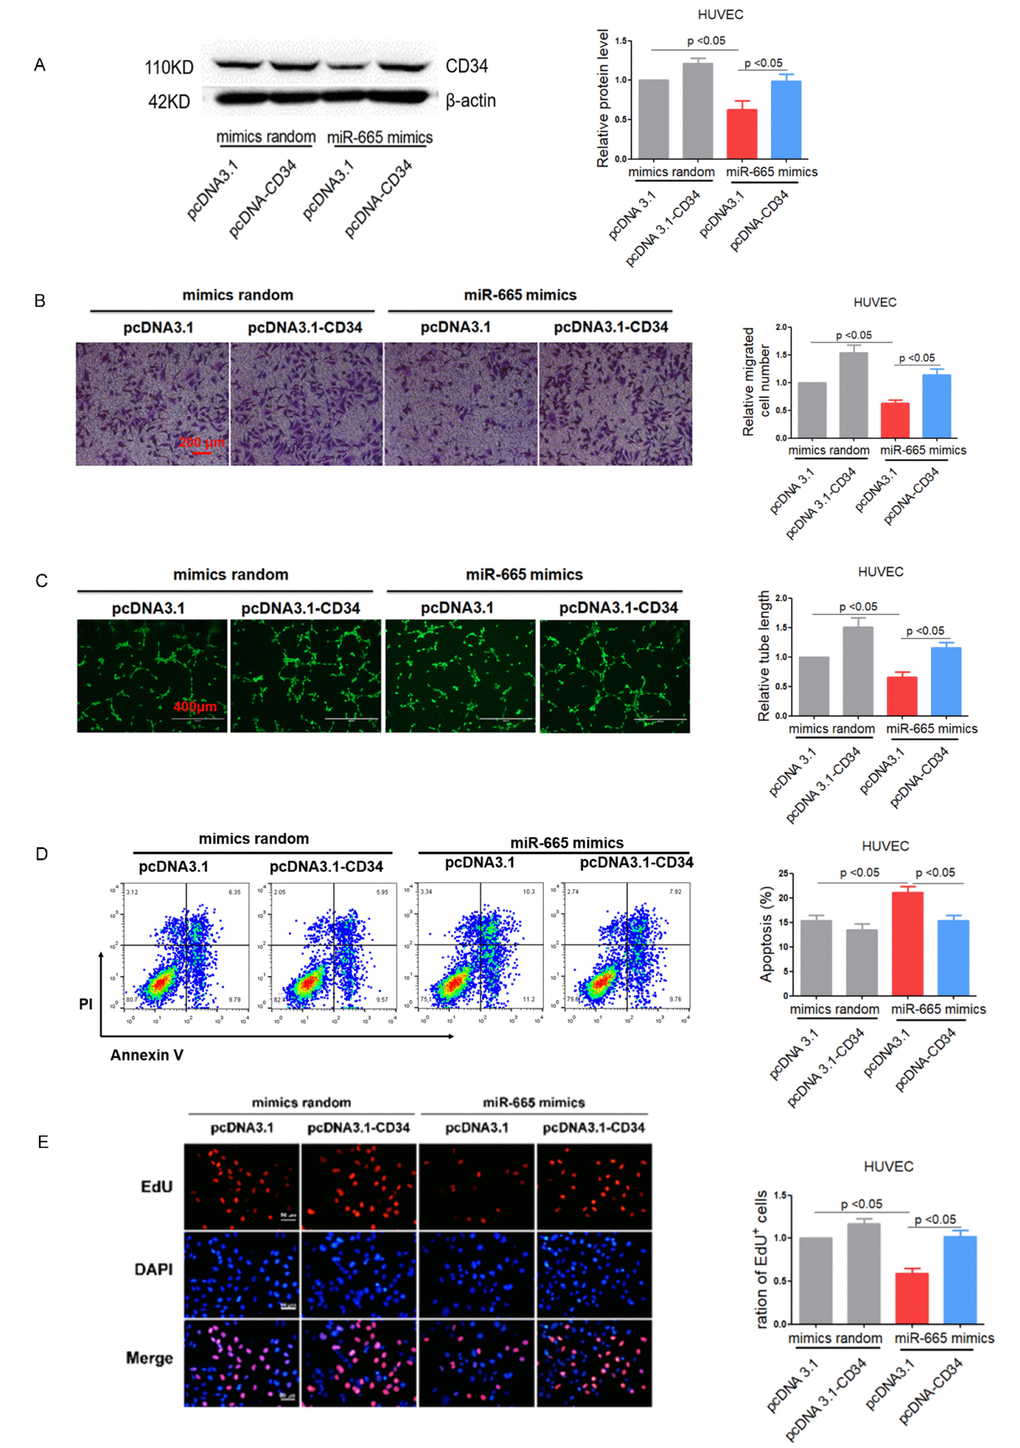 Re-expression of CD34 reverses miR-665 induced endothelium dysfunction in vitro. (A) CD34 protein levels in treated HUVEC cells detected by Western blotting (n=4). (B) Migration evaluated by transwell experiment in HUVEC cells (n=3). (C)Tube formation determined on Matrigel in HUVEC cells (n=4). (D)Apoptosis measured by Annexin V/PI flow cytometric analysis in HUVEC cells (n=4). (E) Proliferation detected by EdU incorporation assays in HUVEC cells (n=4). Data are expressed as mean ± SEM.